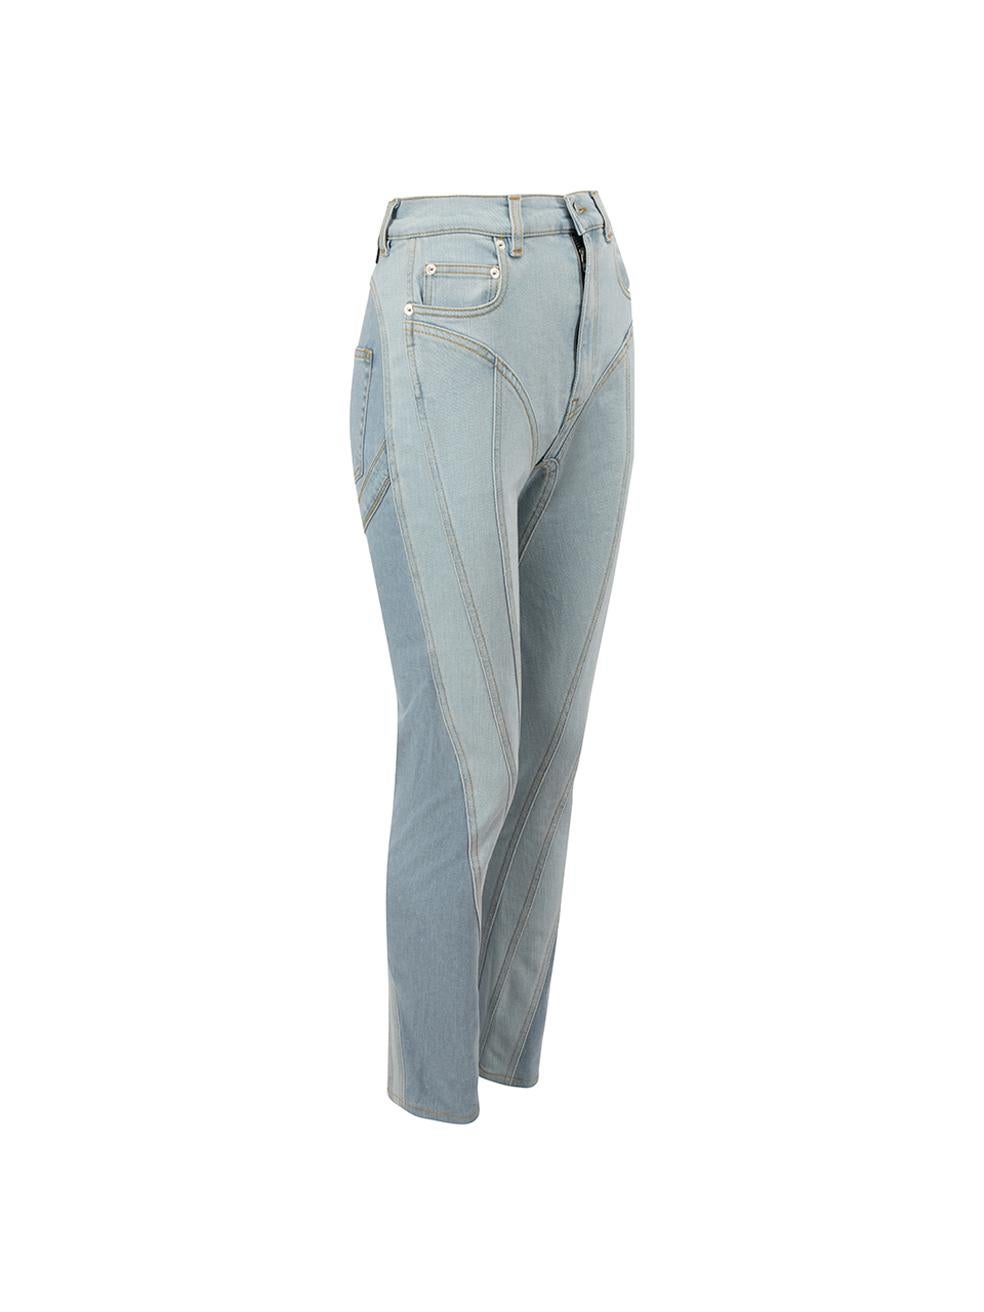 CONDITION is Very good. Hardly any visible wear to jeans is evident on this used Mugler designer resale item.



Details


Light blue

Denim

Straight leg jeans

High rise

Spiral panelled accent

Front zip closure with button

Belt hoops

Front zip